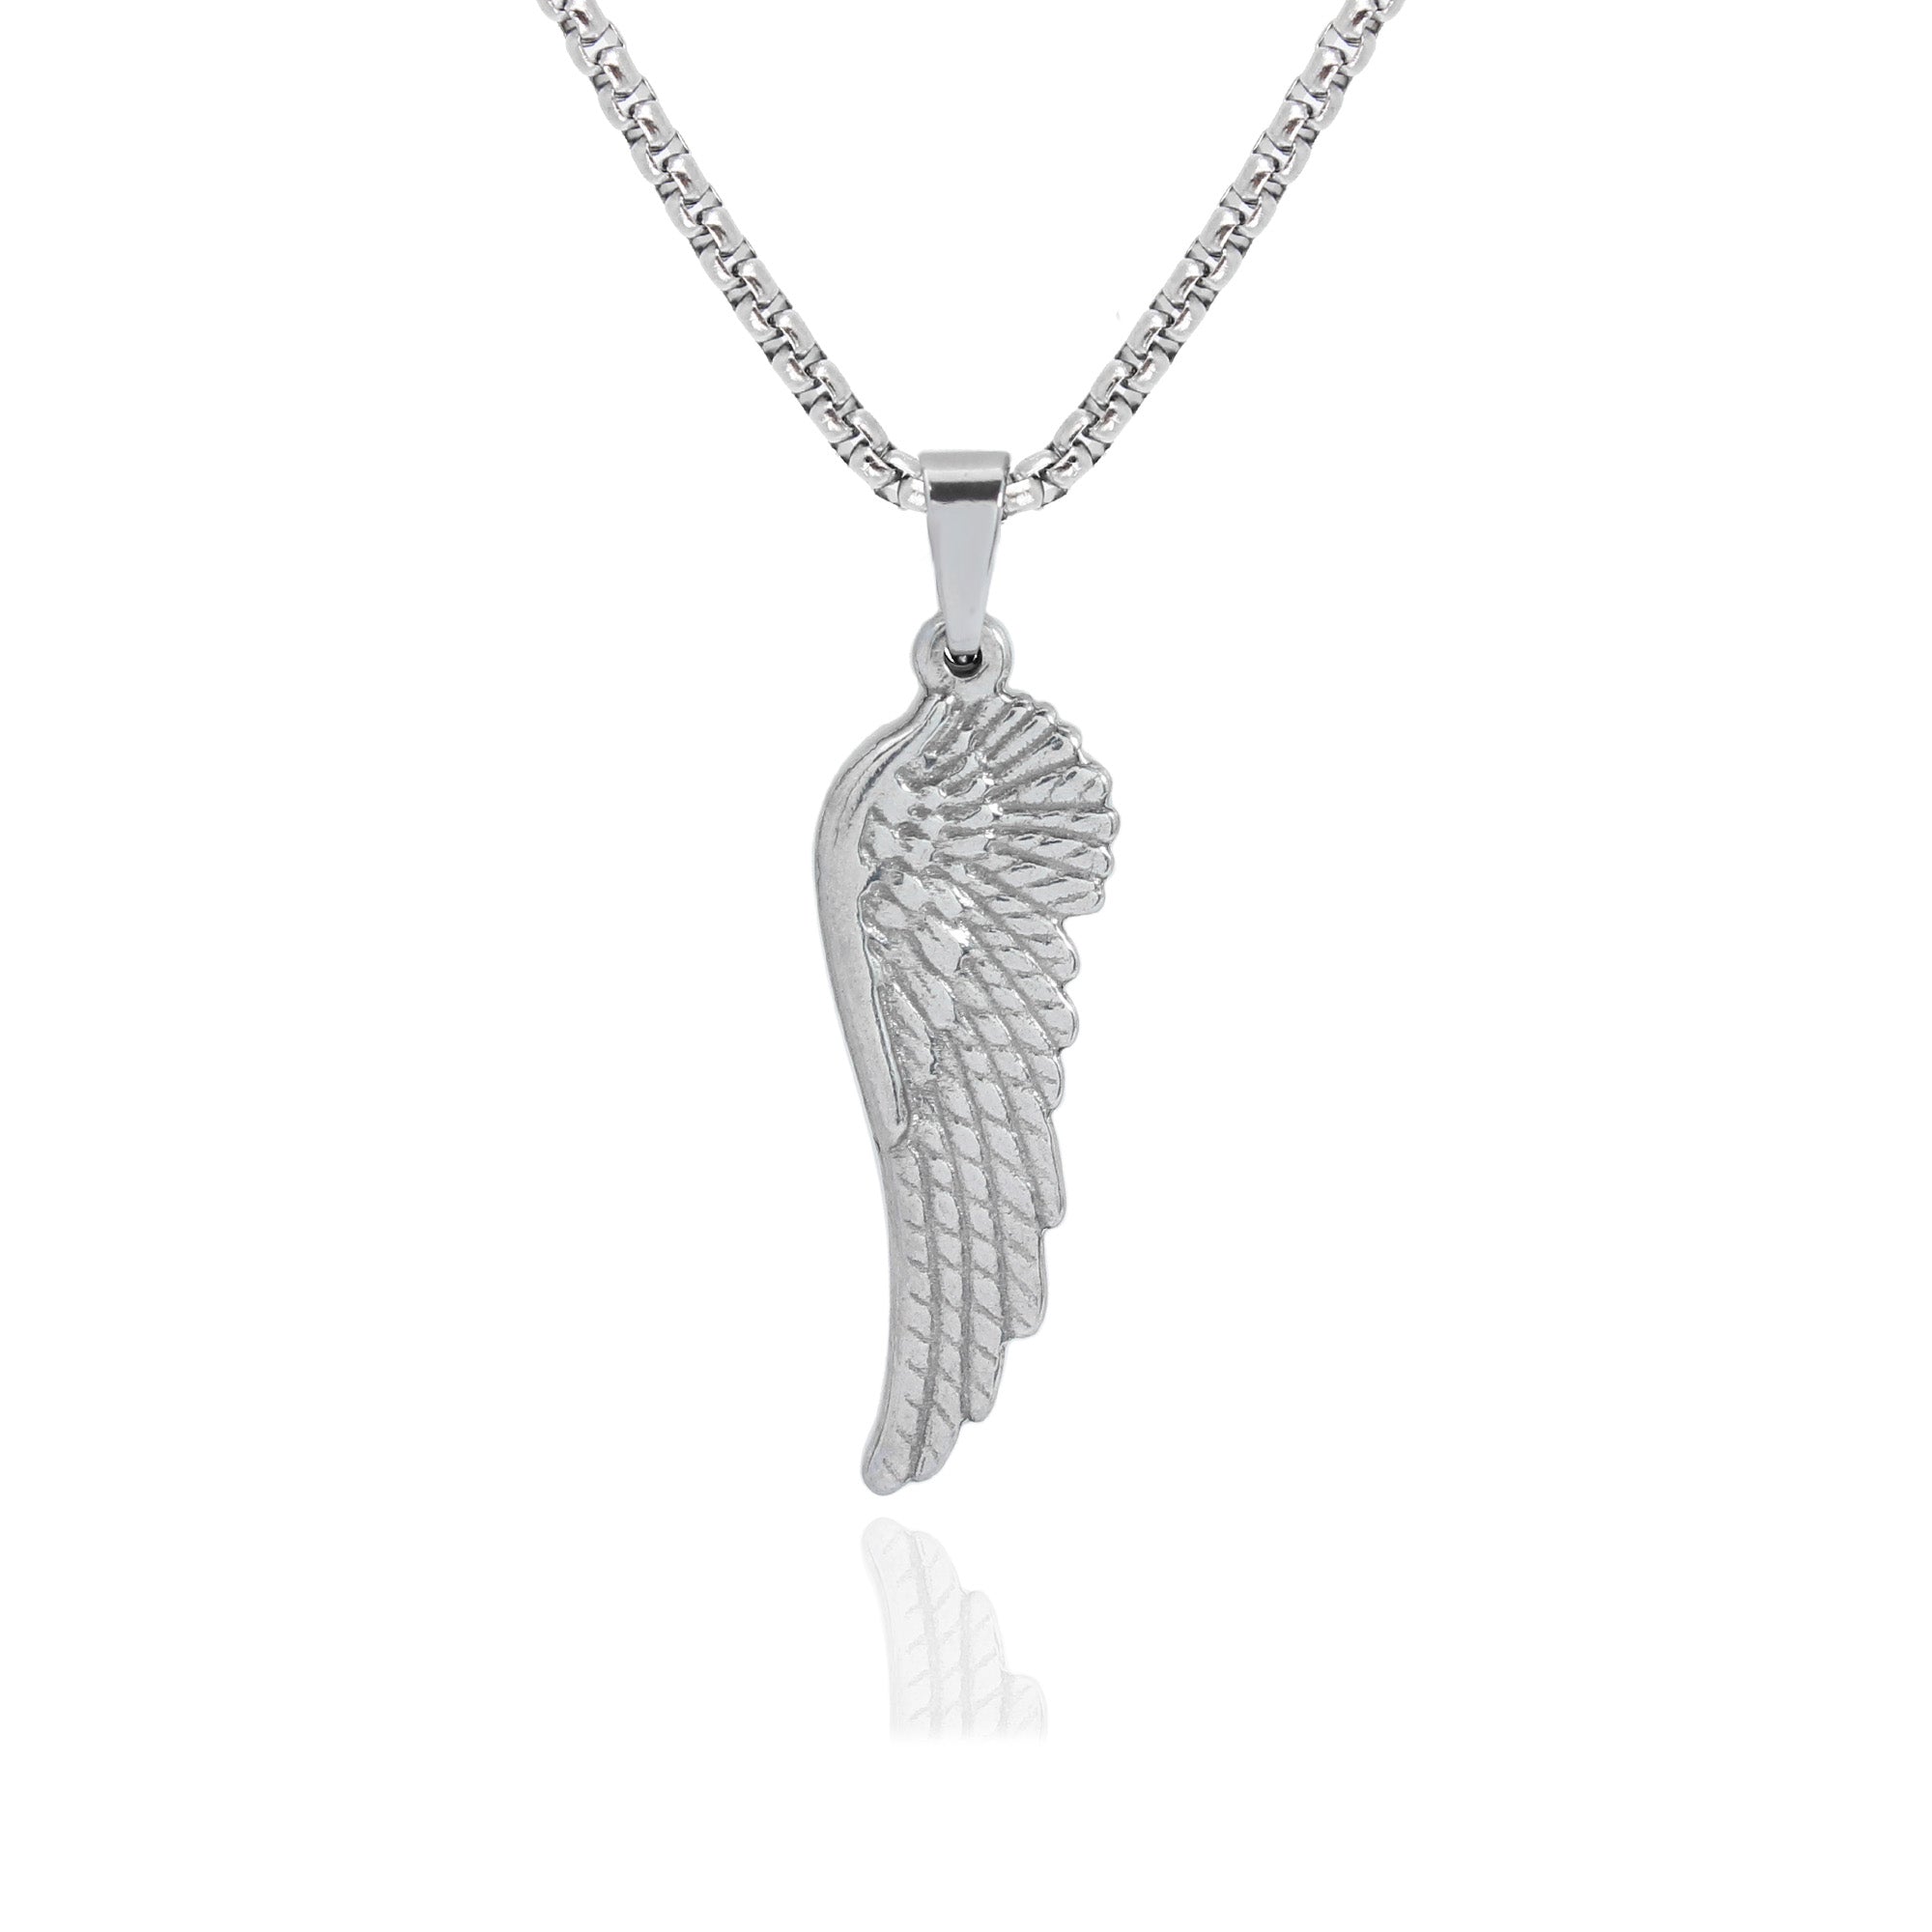 Buy Mens Necklace Feather Charm Pendant in Sterling Silver 925 Online in  India - Etsy